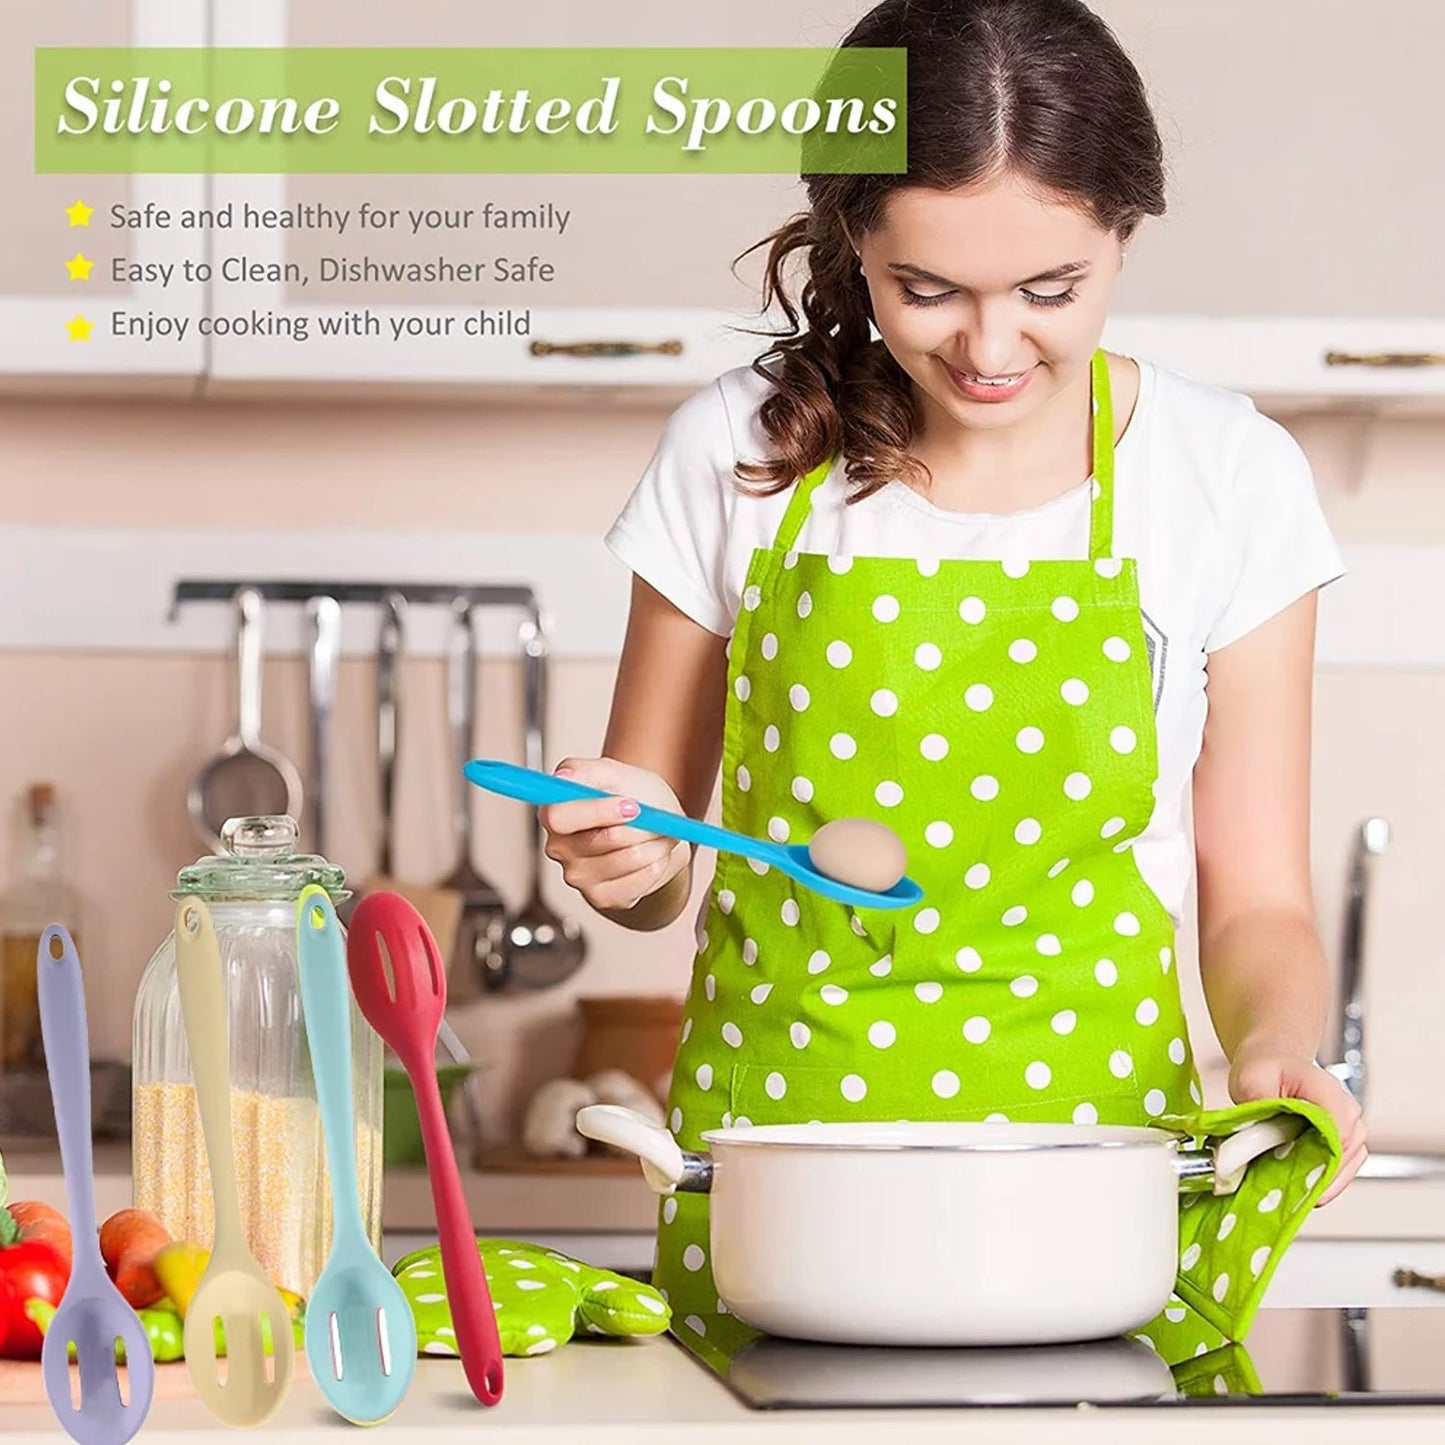 Silicone Slotted Spoon, Silicone Spoons for Cooking, Serving, Draining, Stirring, Dishwasher Safe, Heat-Resistant, Non Stick (27cm)